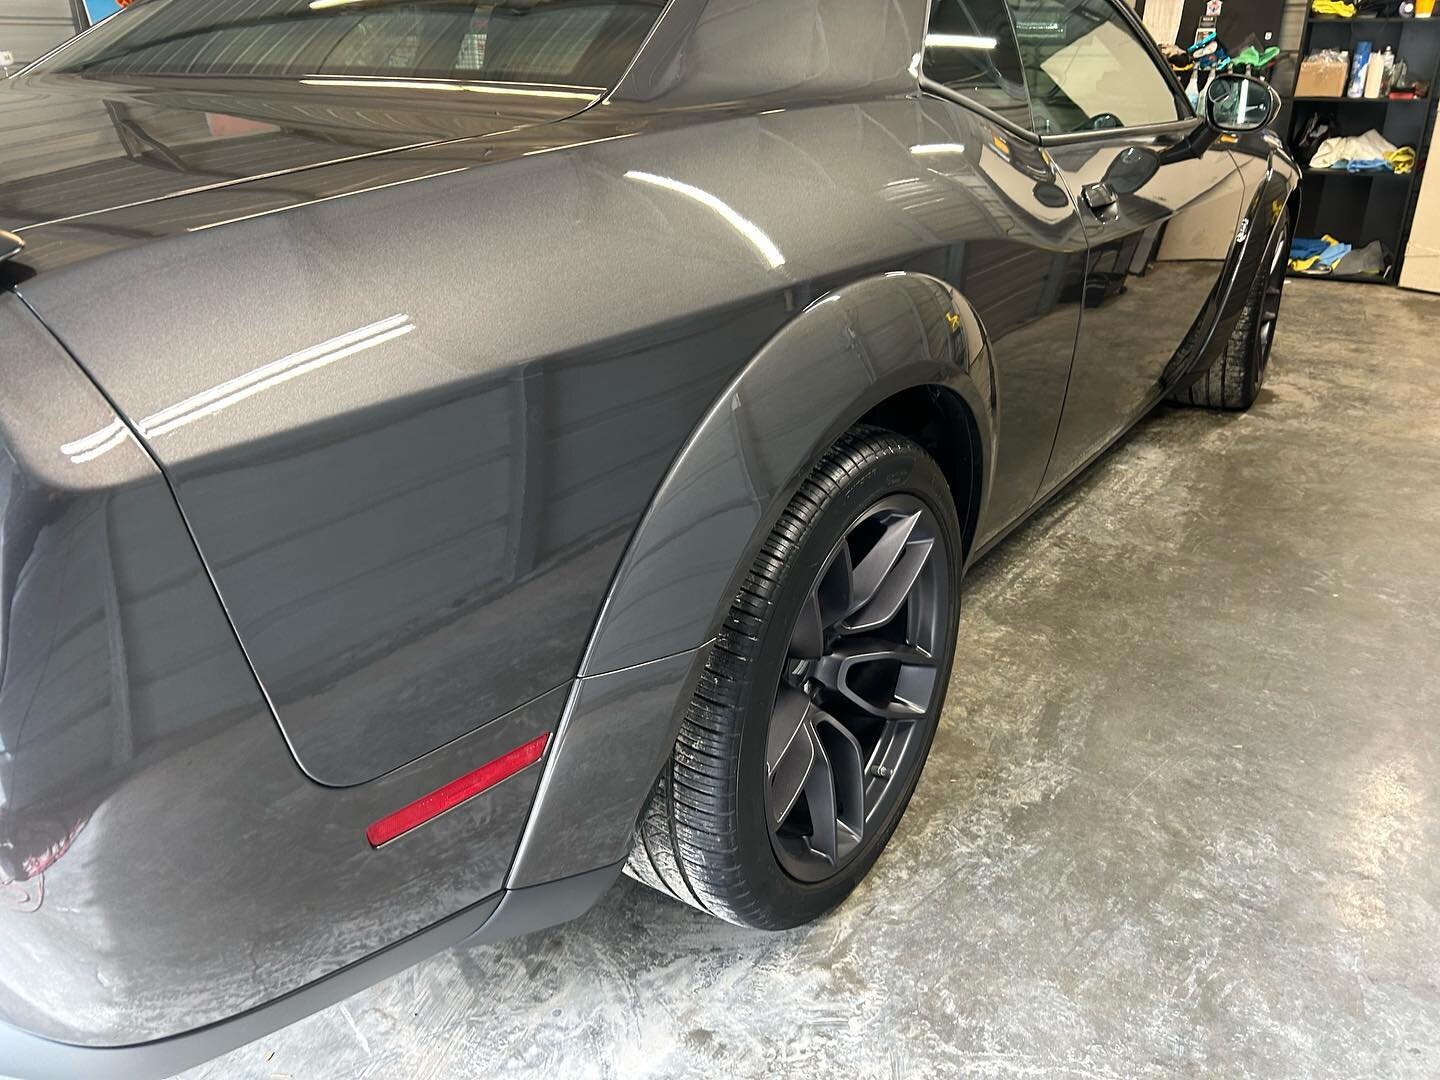 Mz Auto Detail 
I love ❤️ to this jobs 
Ceramic coating in Dodge challenger !!
😍😍
(425)326-2768
www.mzautodetail.com
automz@outlook.com
#seattledetailing